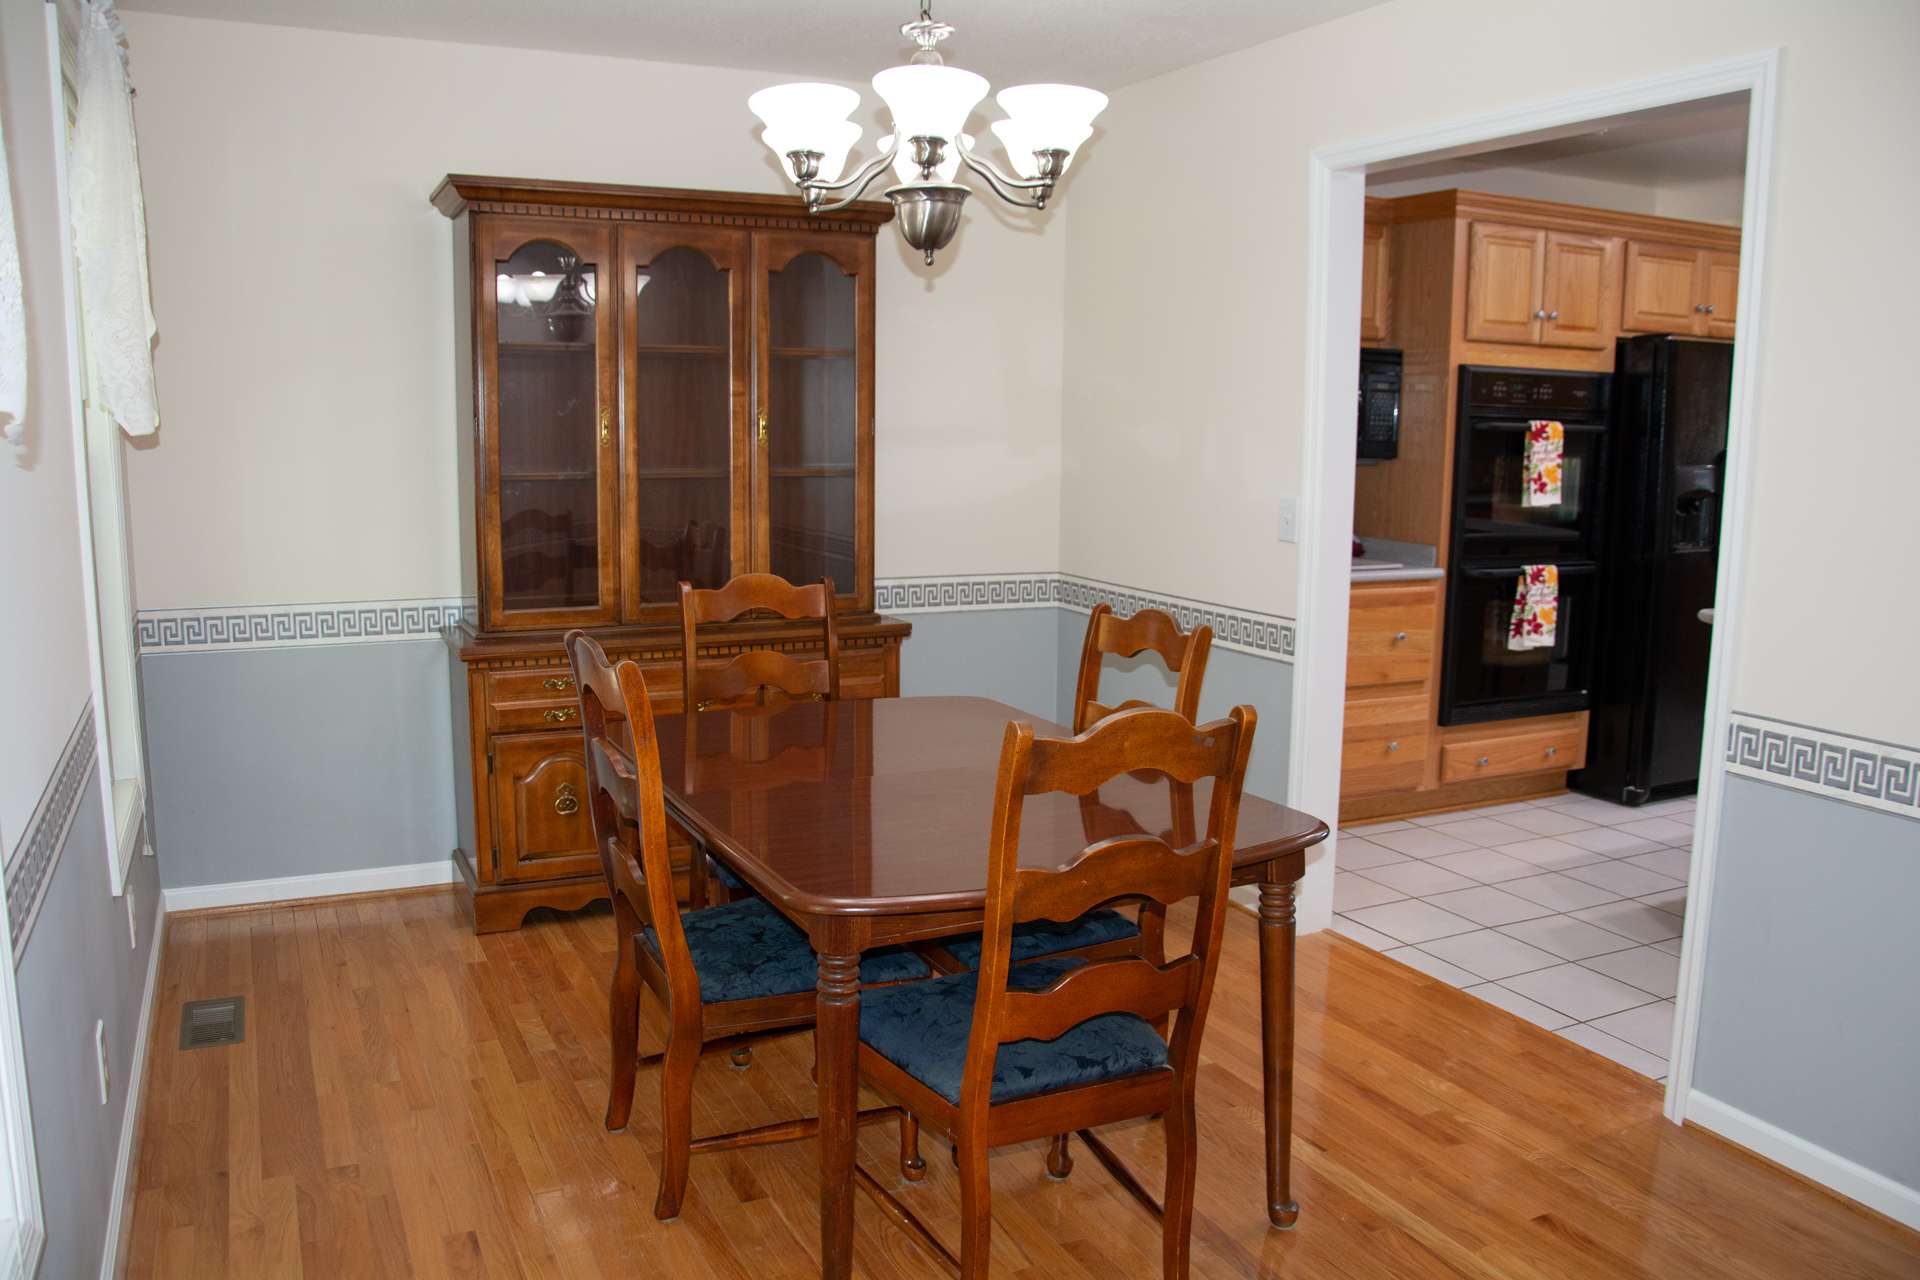 Dining area is conveniently located between the kitchen and living room.  Plenty of room for table, chairs and hutch.